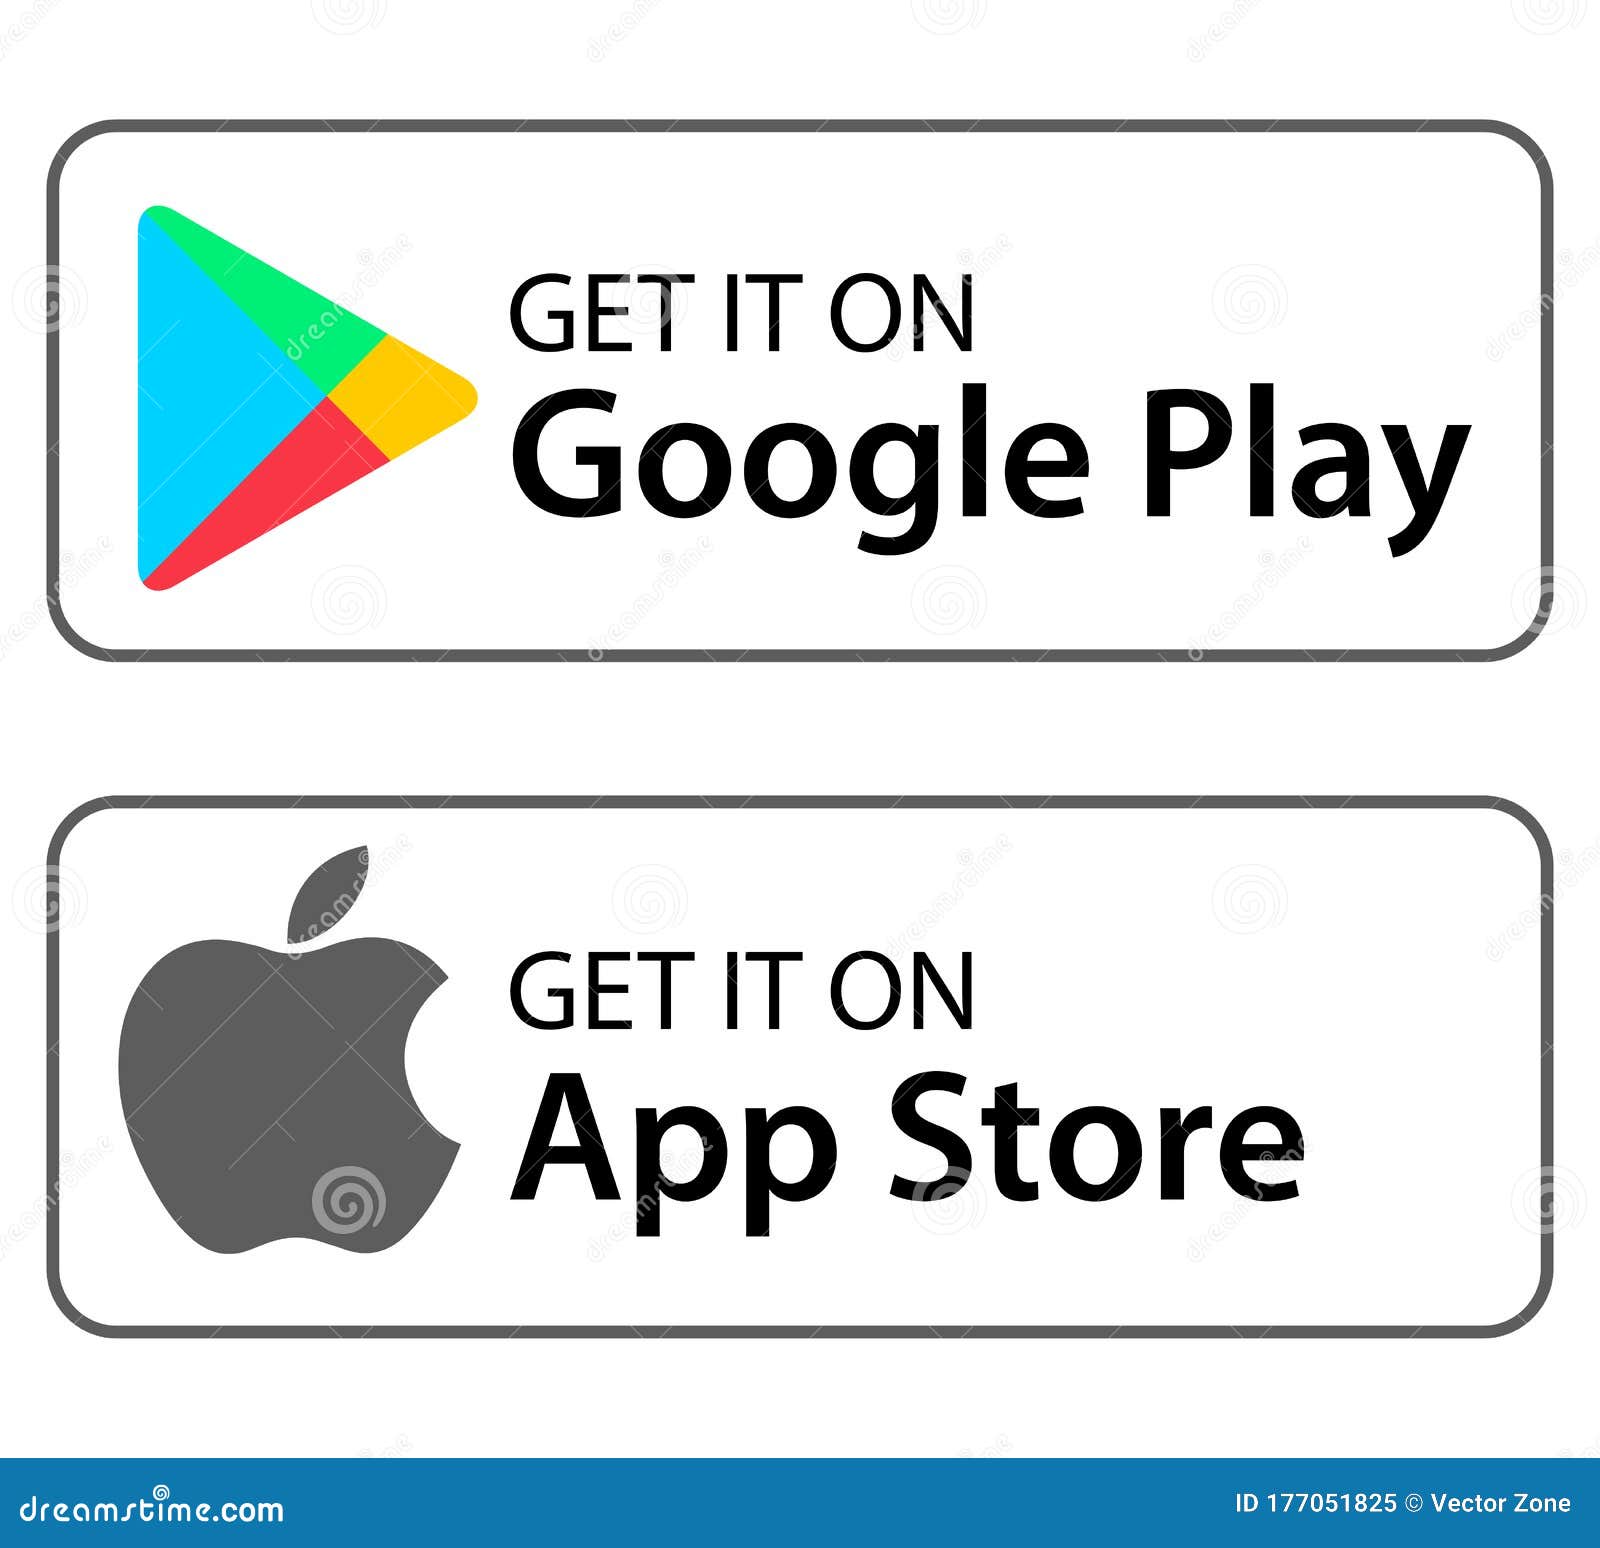 Google Play App Store Icons Download From Google Pay Editorial Image Illustration Of Application Logotype 177051825